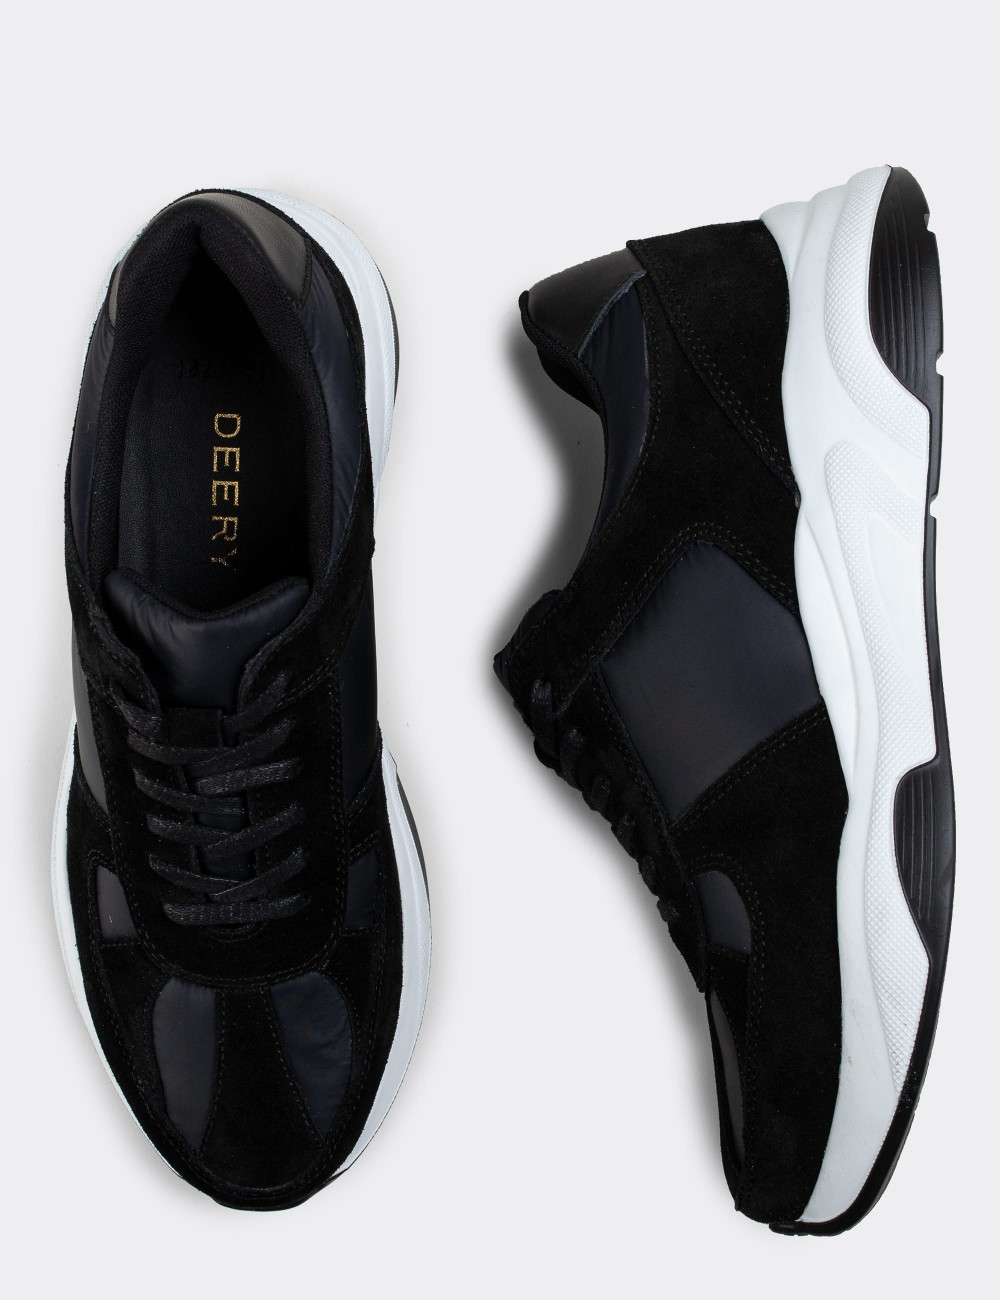 Black Suede Leather Sneakers - 01821MSYHE01